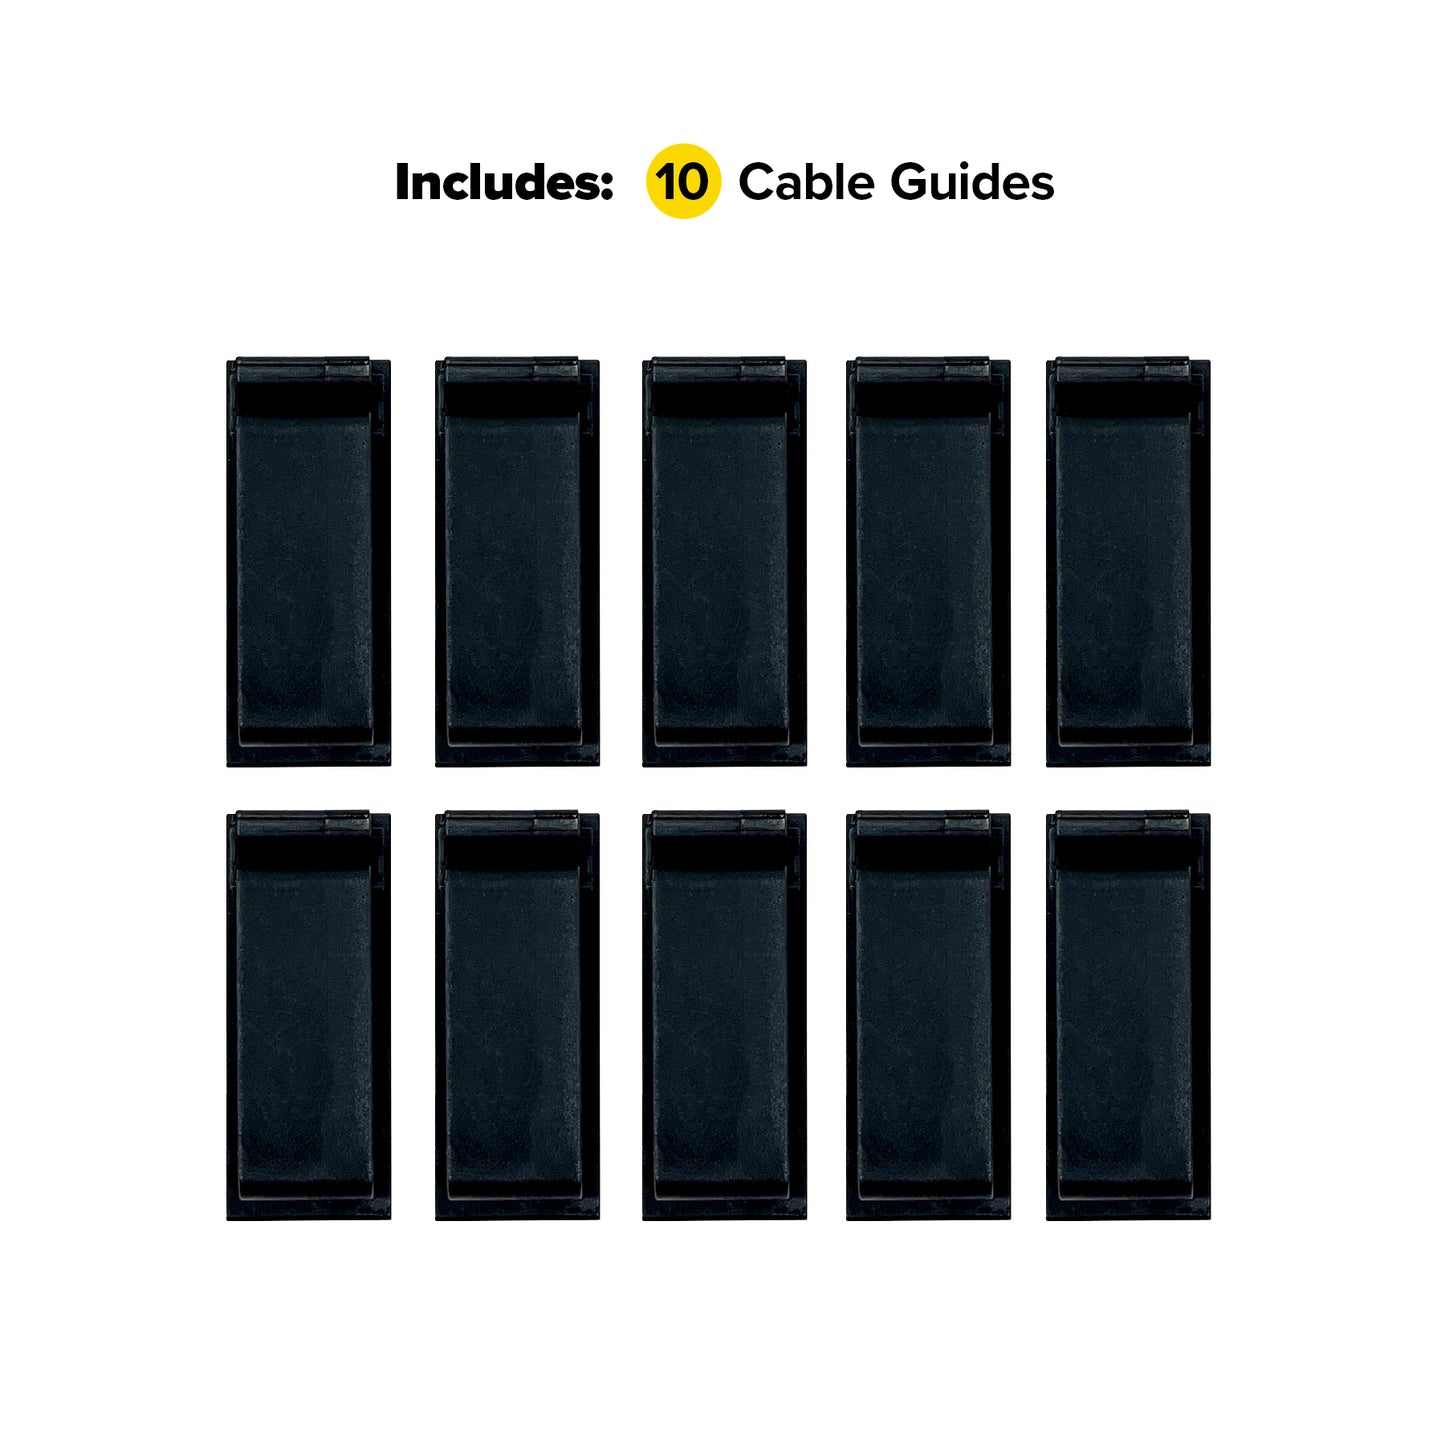 Cable Guides - Medium (10-Pack)